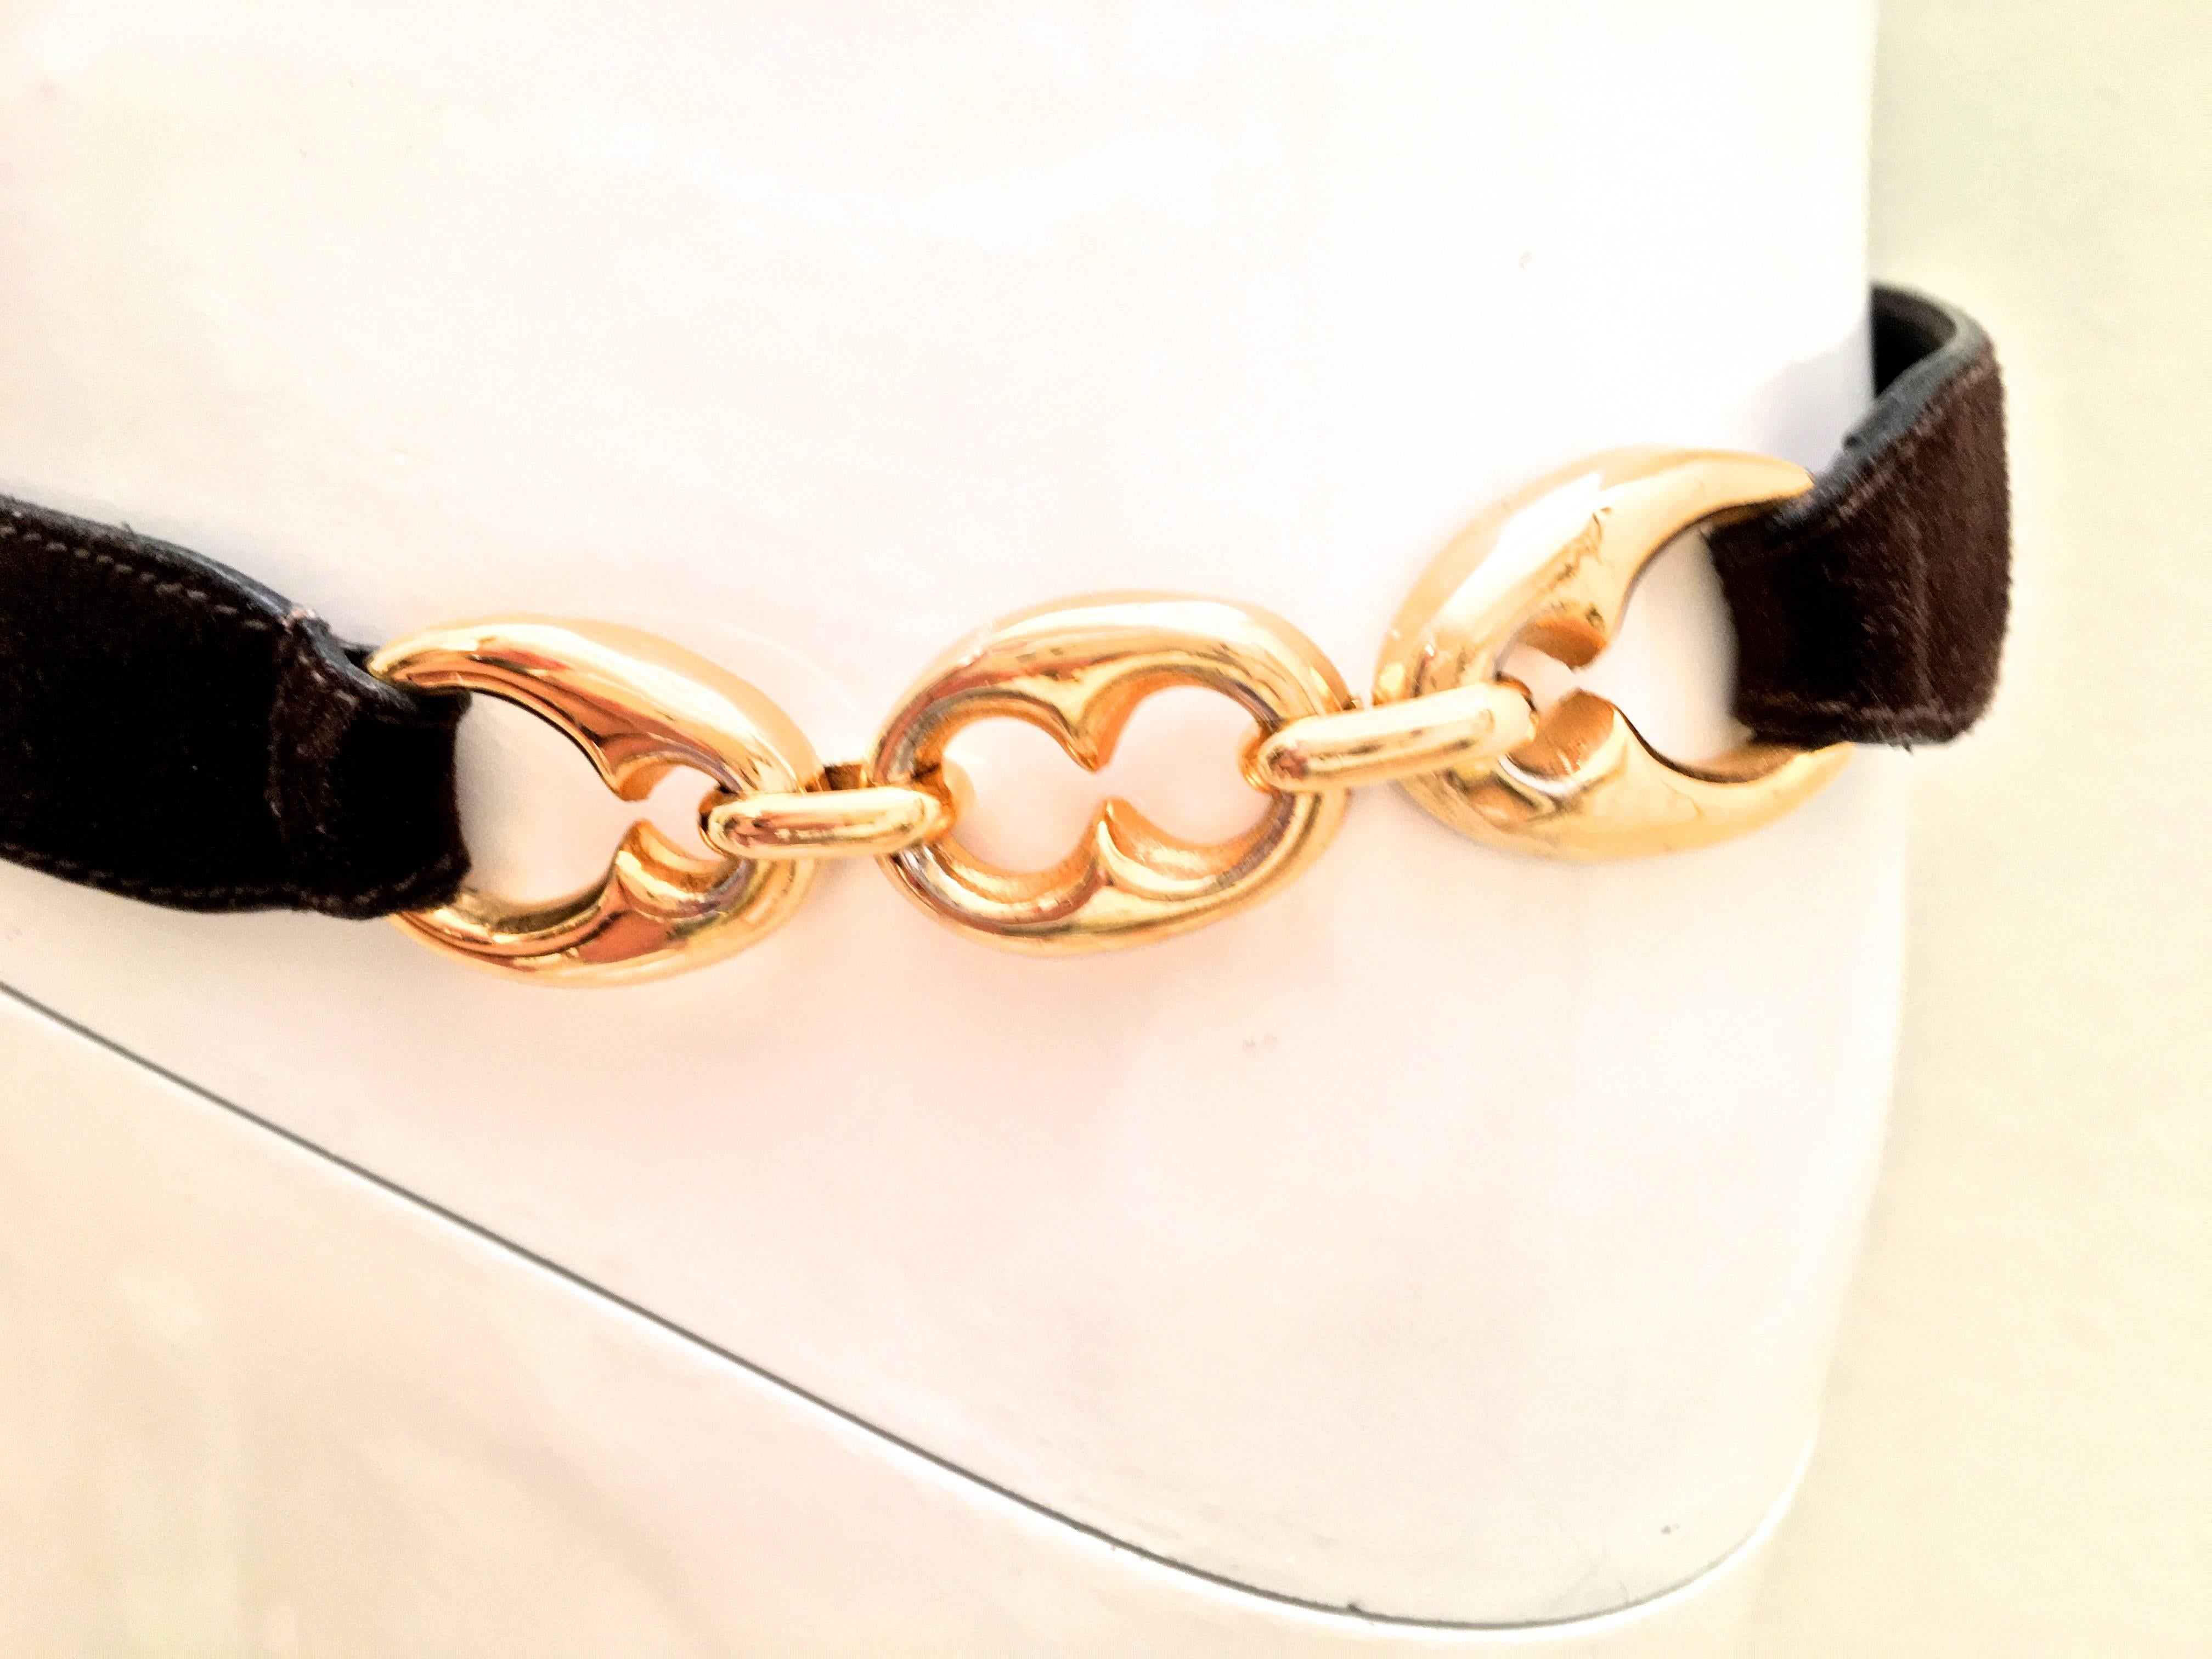 Presented here is a beautiful Celine vintage belt with gold tone links and brown suede. It is marked on the inside 'Celine Paris' size 80. Although the belt is adjustable because of a grommet that can be placed into different holes on the belt. The